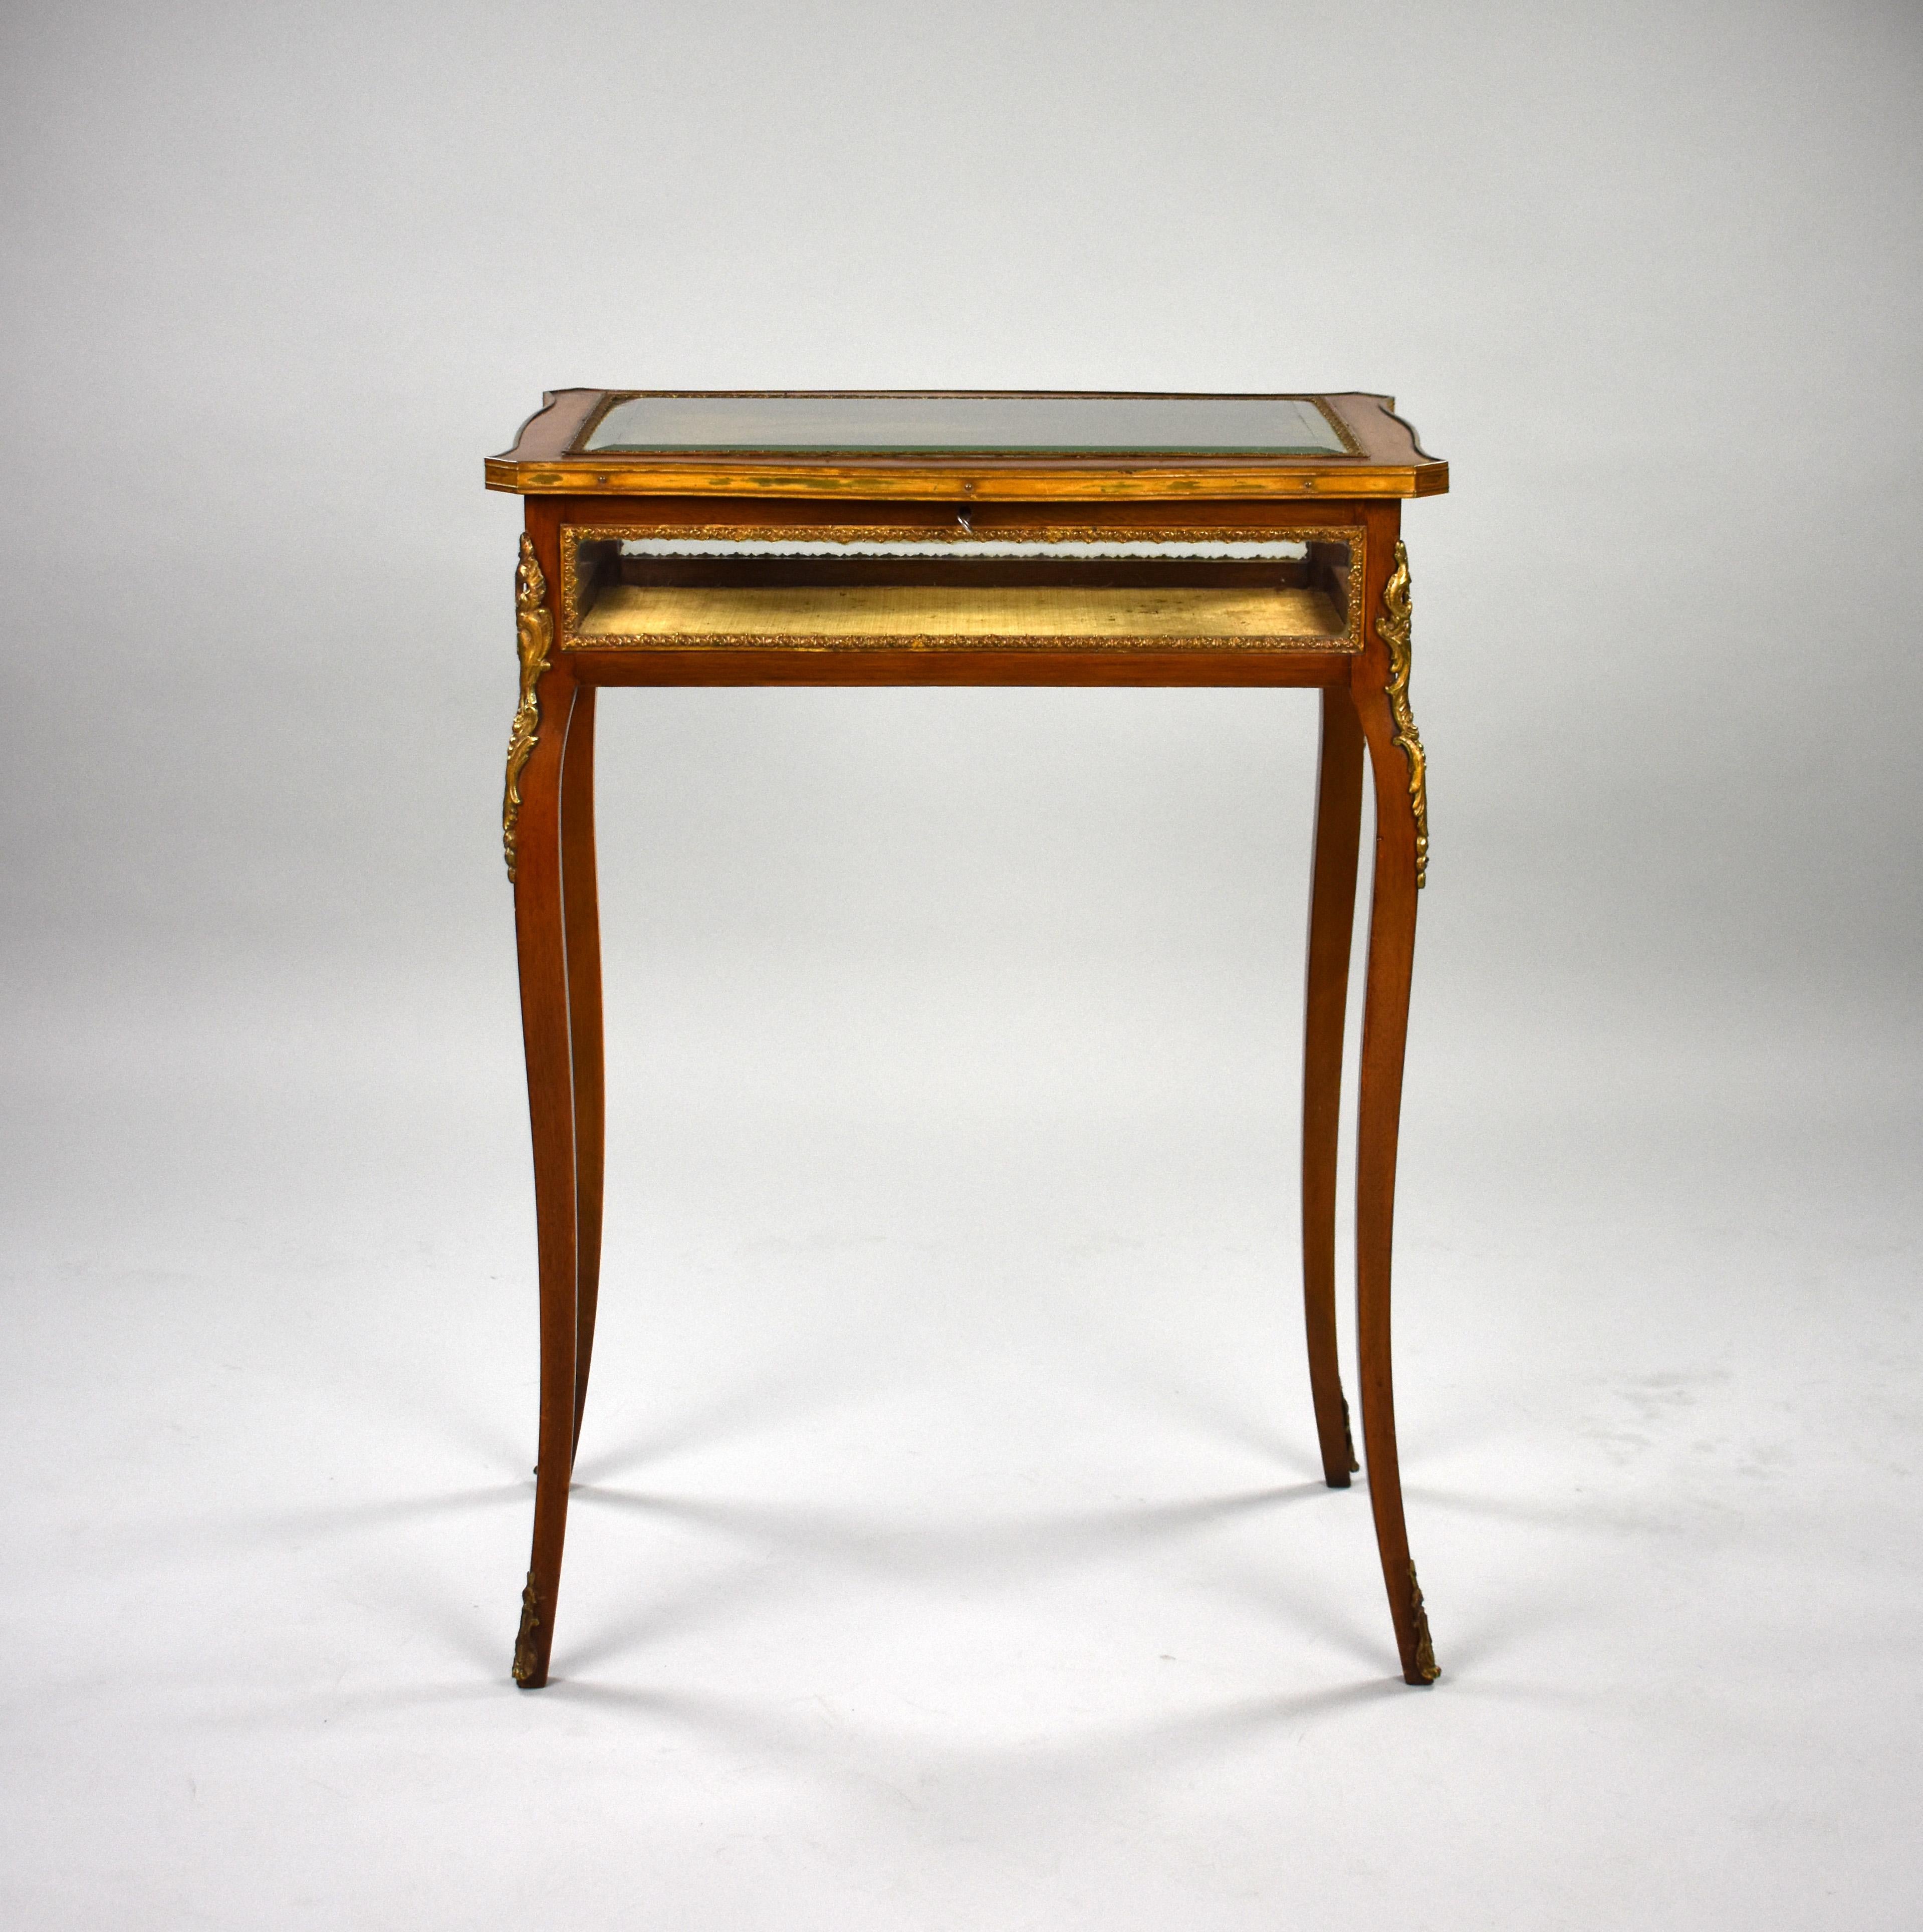 For sale is a good quality 19th century French mahogany bijouterie table, decorated with brass mounts throughout, the lid opening to a fabric lined interior. The table is in very good condition for its age. 

Measures: Width: 59cm Depth: 39cm